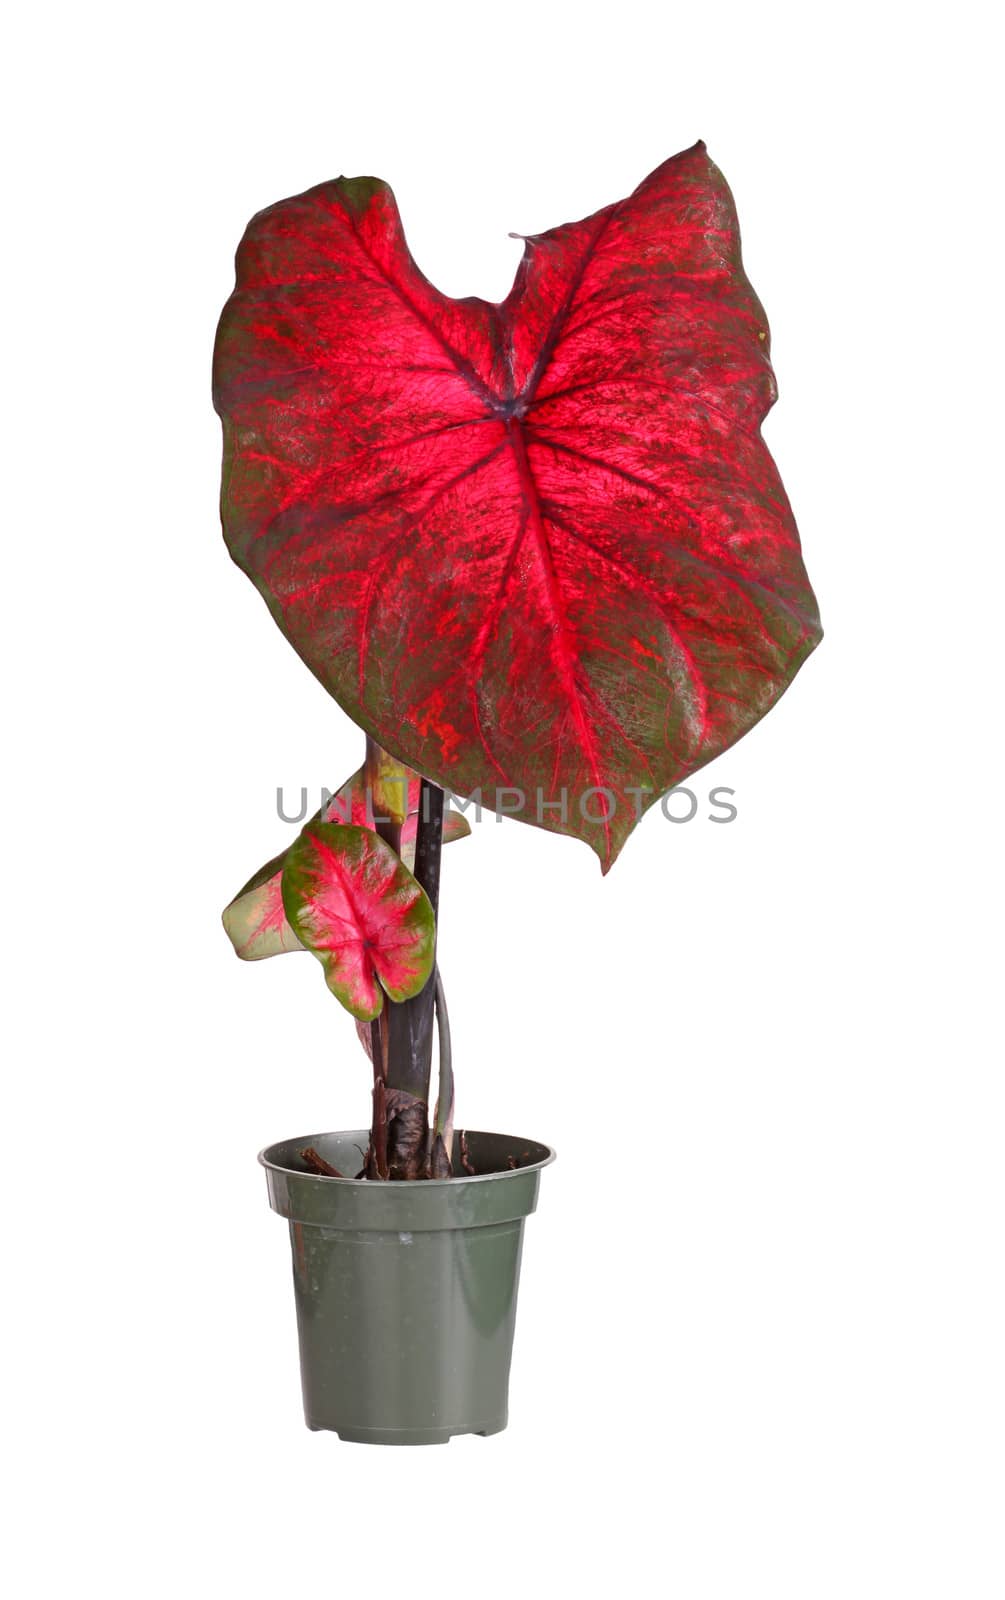 Small potted caladium plant ready for transplanting by sgoodwin4813